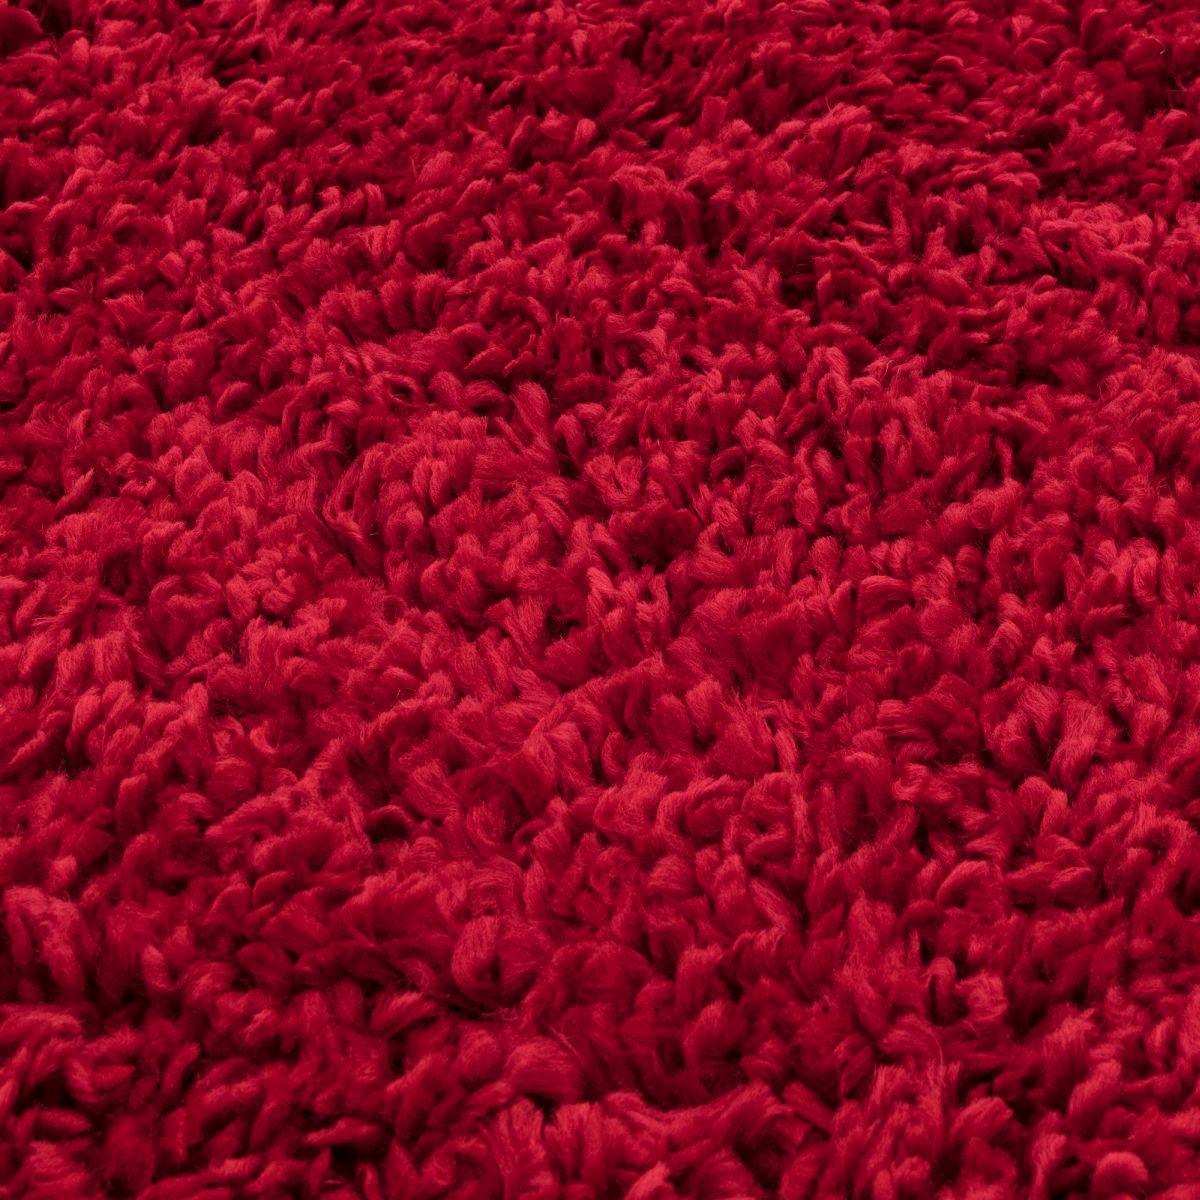 Ritchie Chunky Shaggy Rug - Red